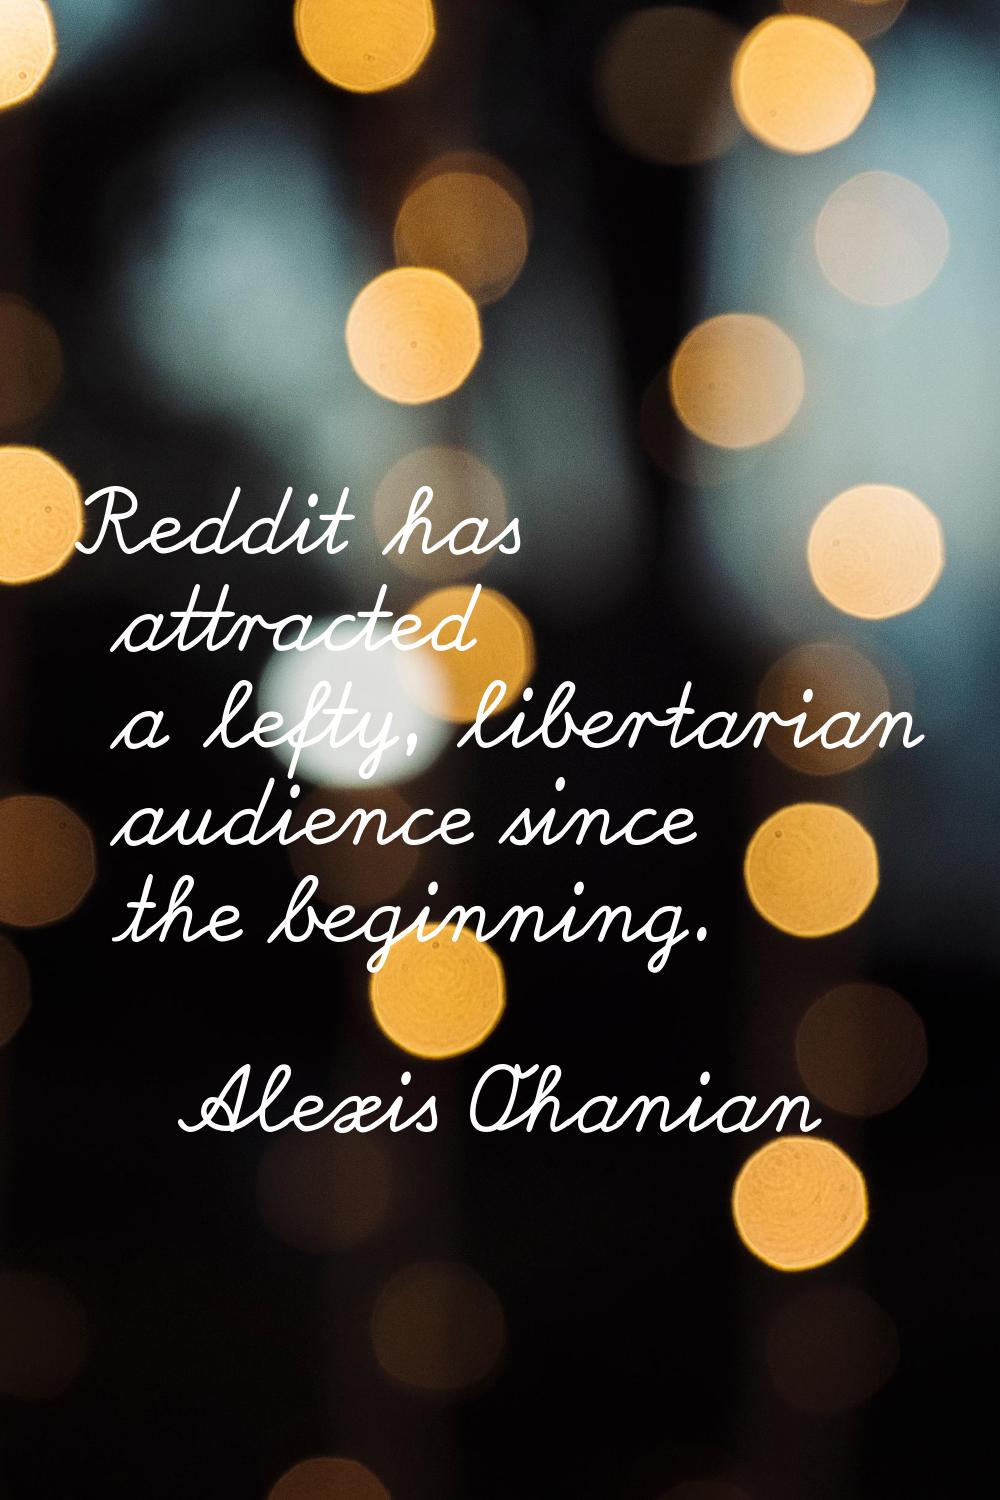 Reddit has attracted a lefty, libertarian audience since the beginning.